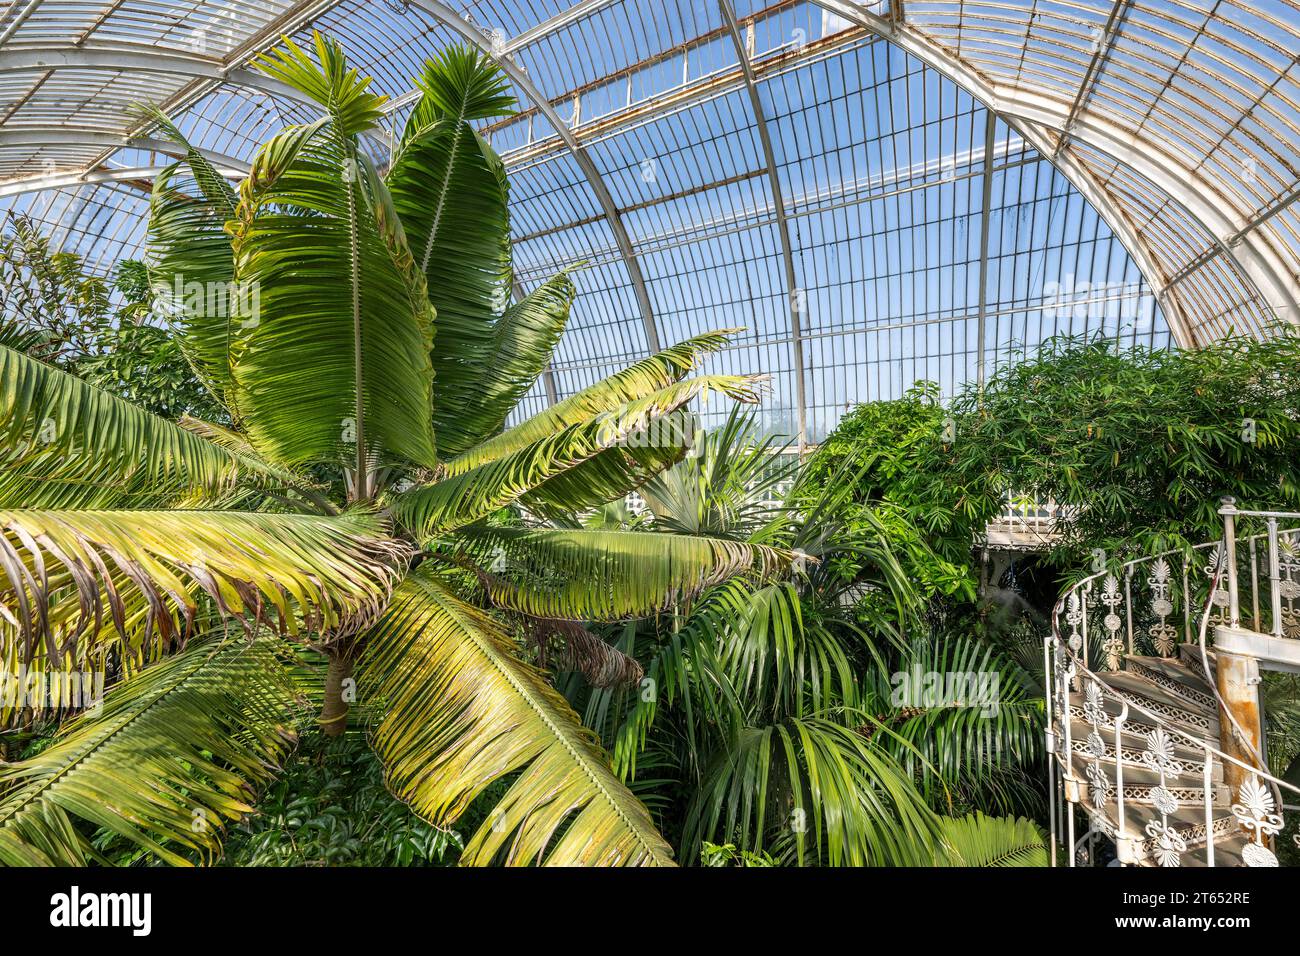 Palm House, oldest Victorian greenhouse in the world, Royal Botanic Gardens, Kew, London, England, Great Britain Stock Photo